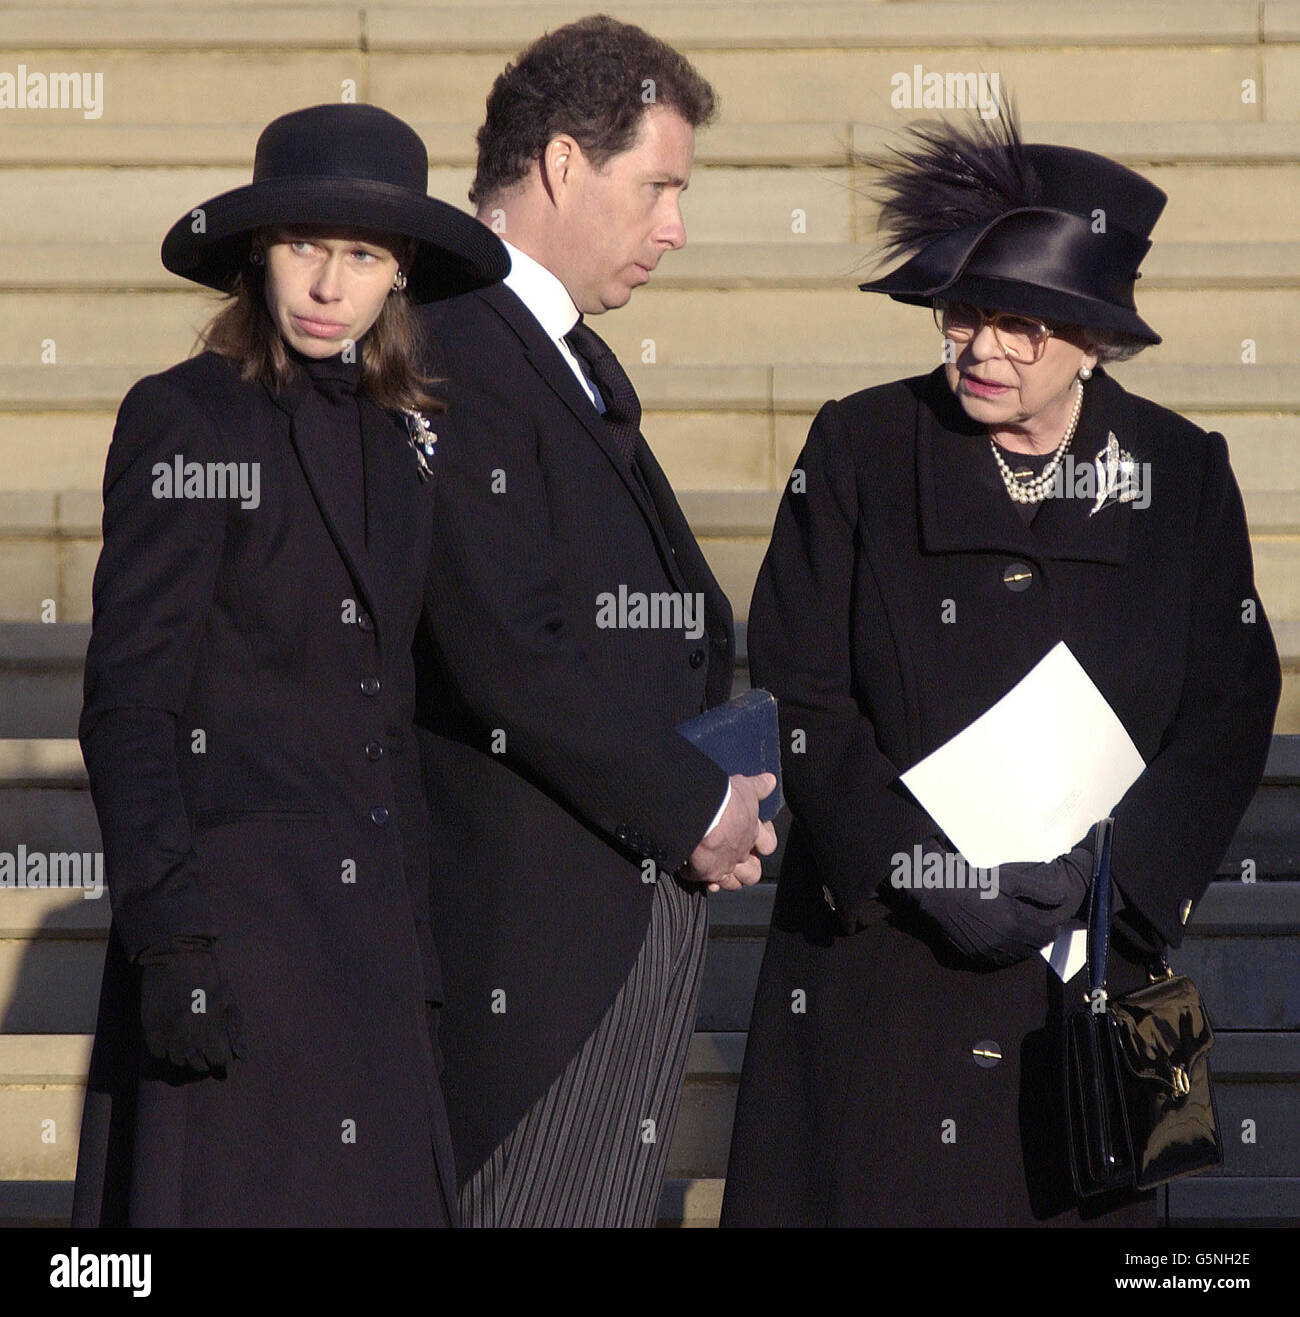 WARNING - NO CROPPING: Britain's Queen Elizabeth II (right) Viscount Linley (centre) and Sarah Chatto arrive for the funeral of Princess Margaret at St George's Chapel in Windsor Castle. Princess Margaret died aged 71. * Note to editors (not for publication): Photographers have been asked not to take close-up pictures of Princess Margaret's children and young people attending today's funeral. Editors are therefore asked NOT to substantially recrop this image* Stock Photo